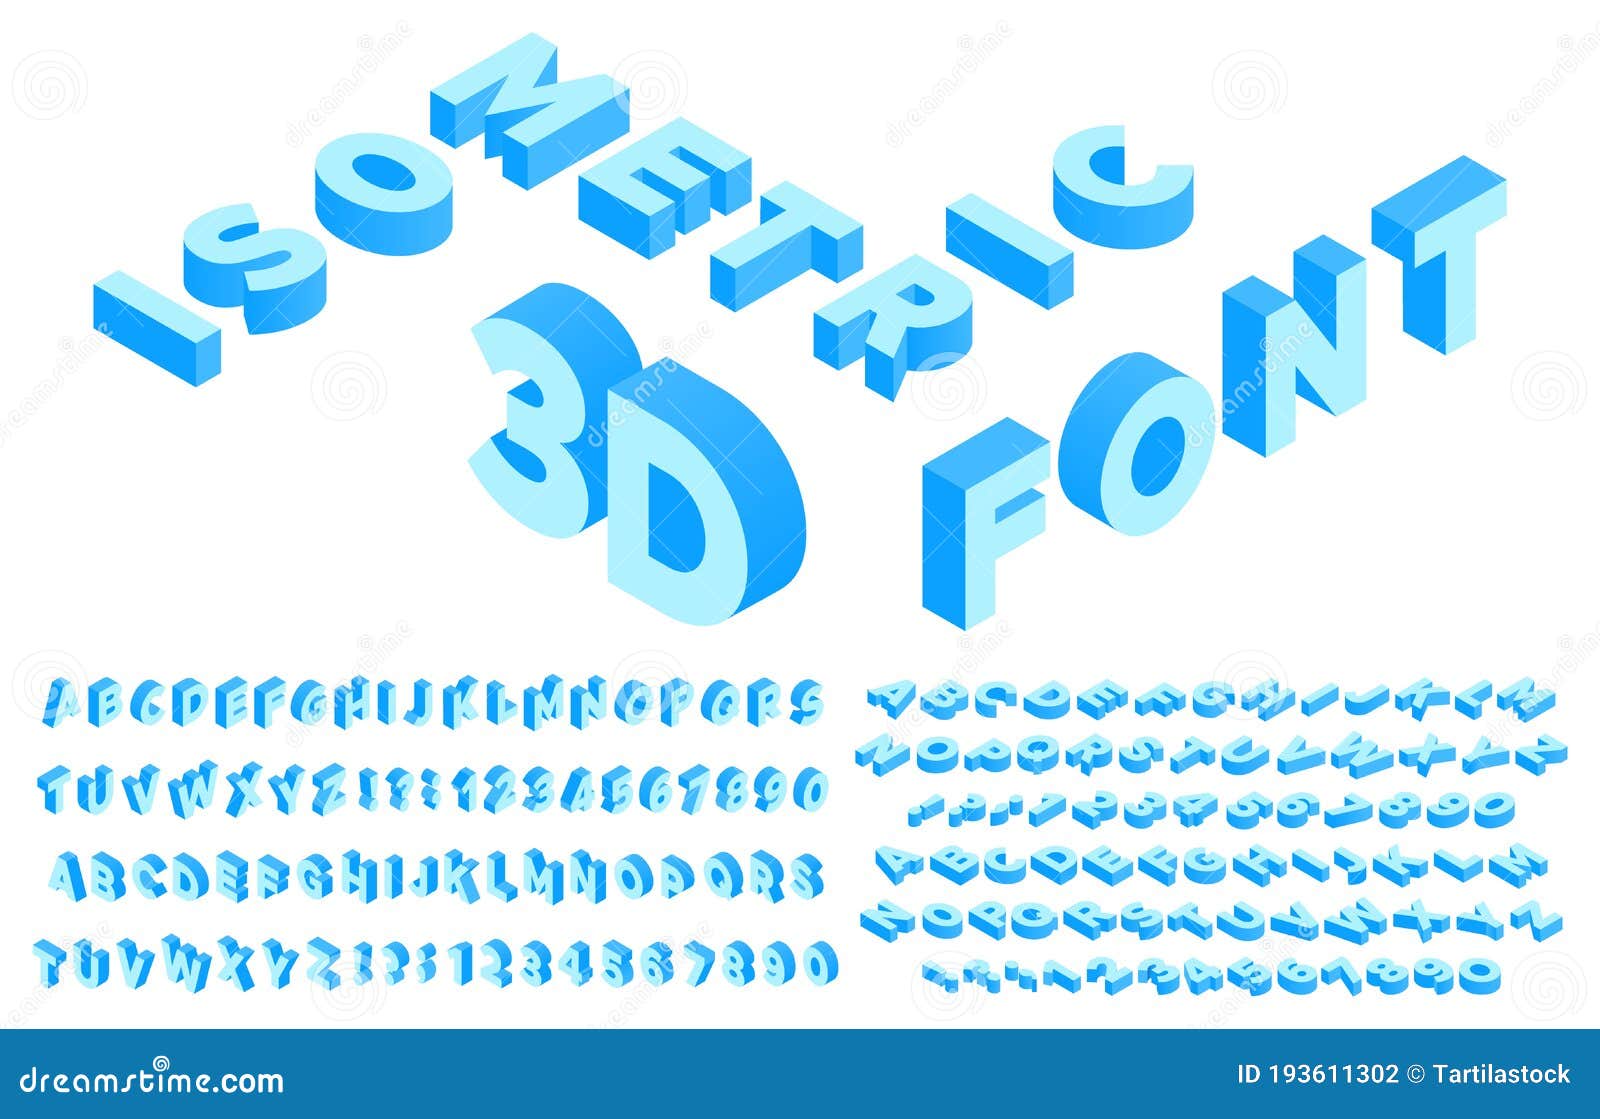 Isometric 3d Font Perspective Alphabet Lettering Numbers And